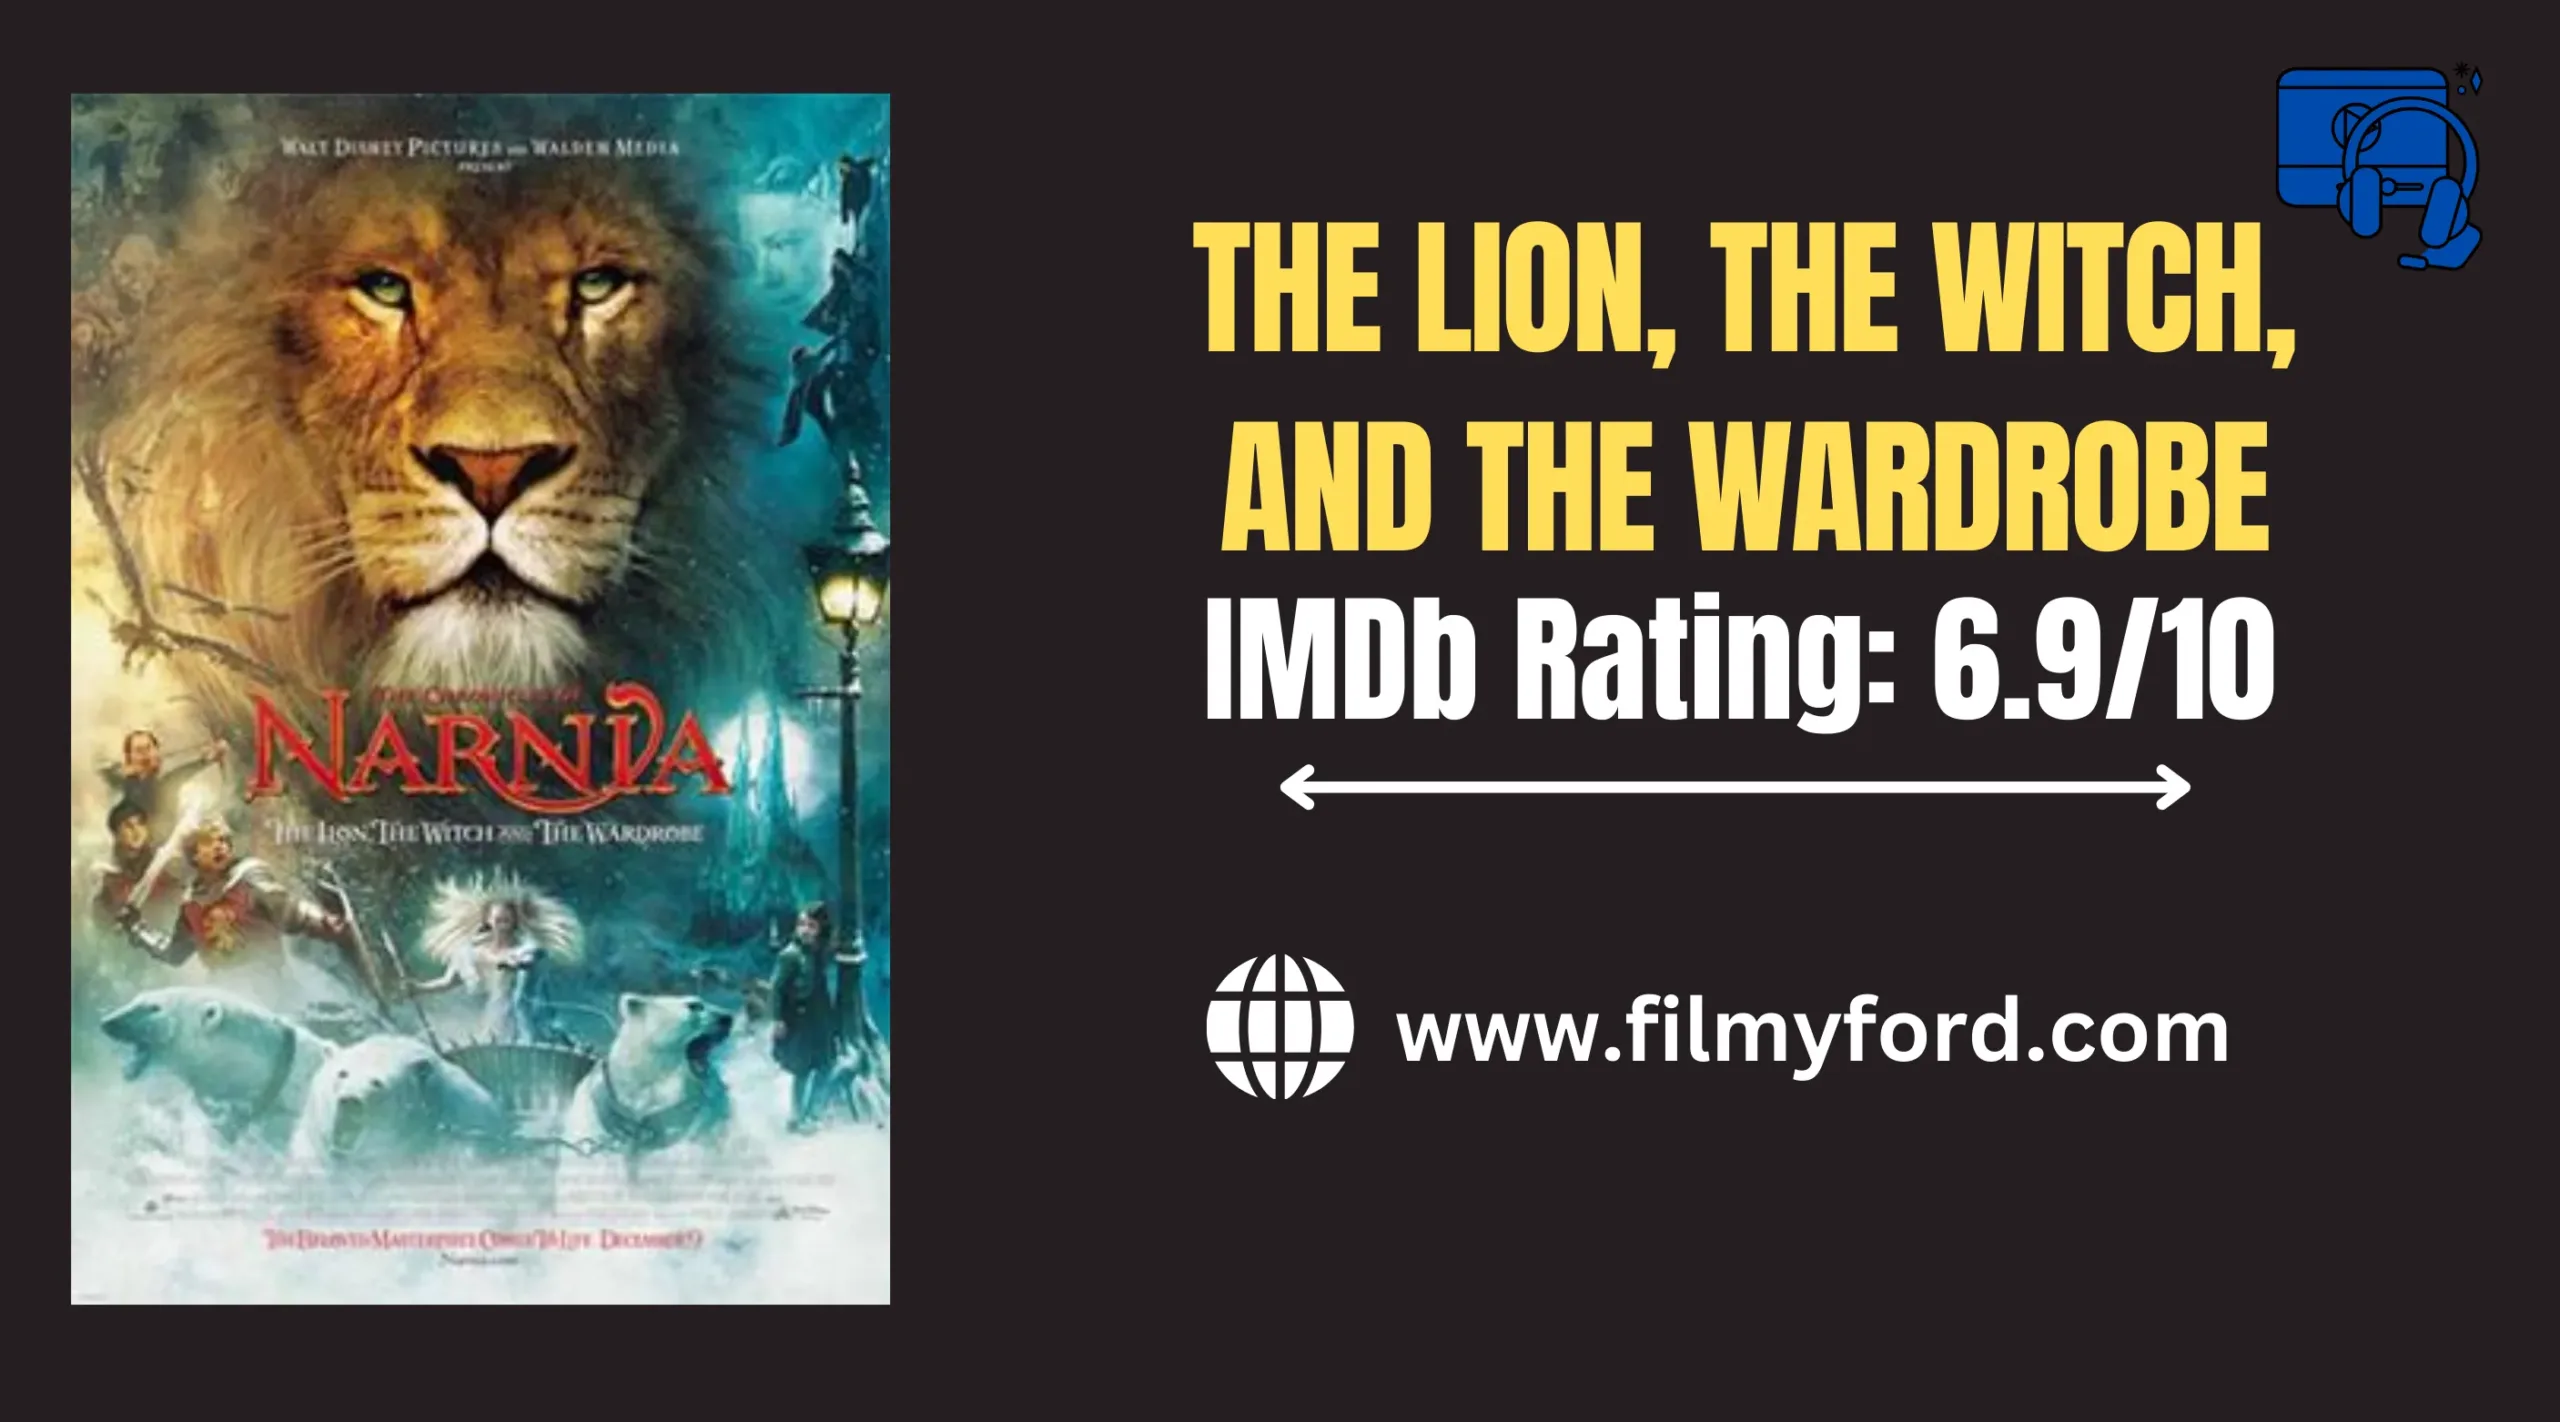 The Lion, The Witch, And The Wardrobe (1979)